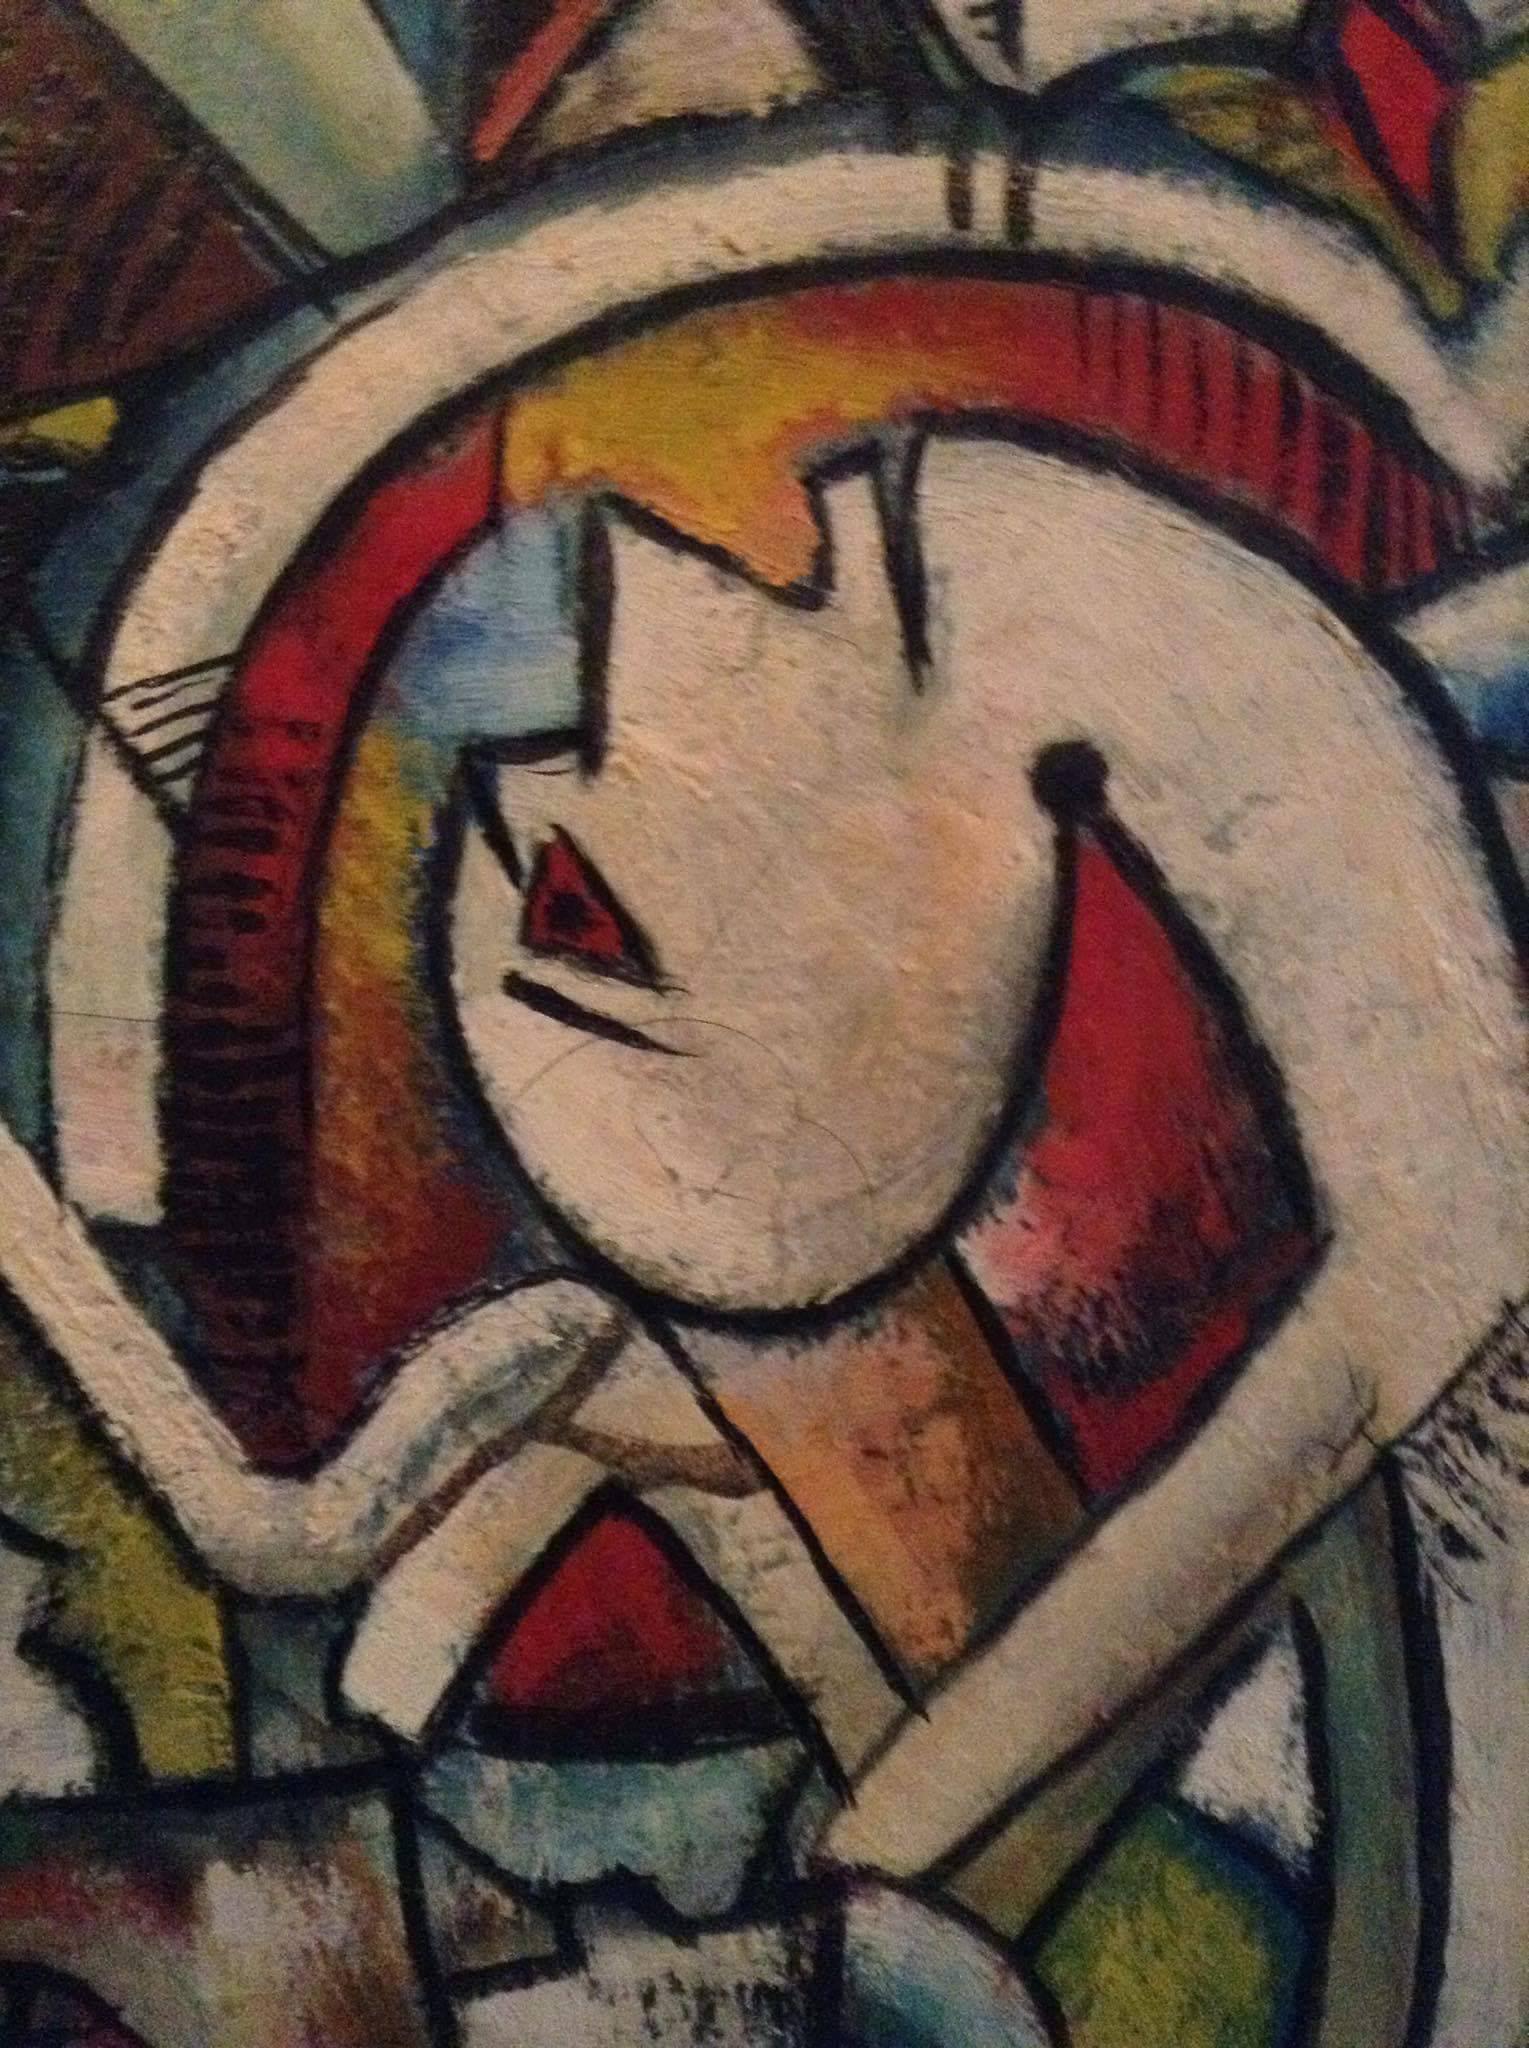 Cubist, Surrealist oil on canvas painting... signed and dated, RD 1971. Amazing use of color, extremely well executed.